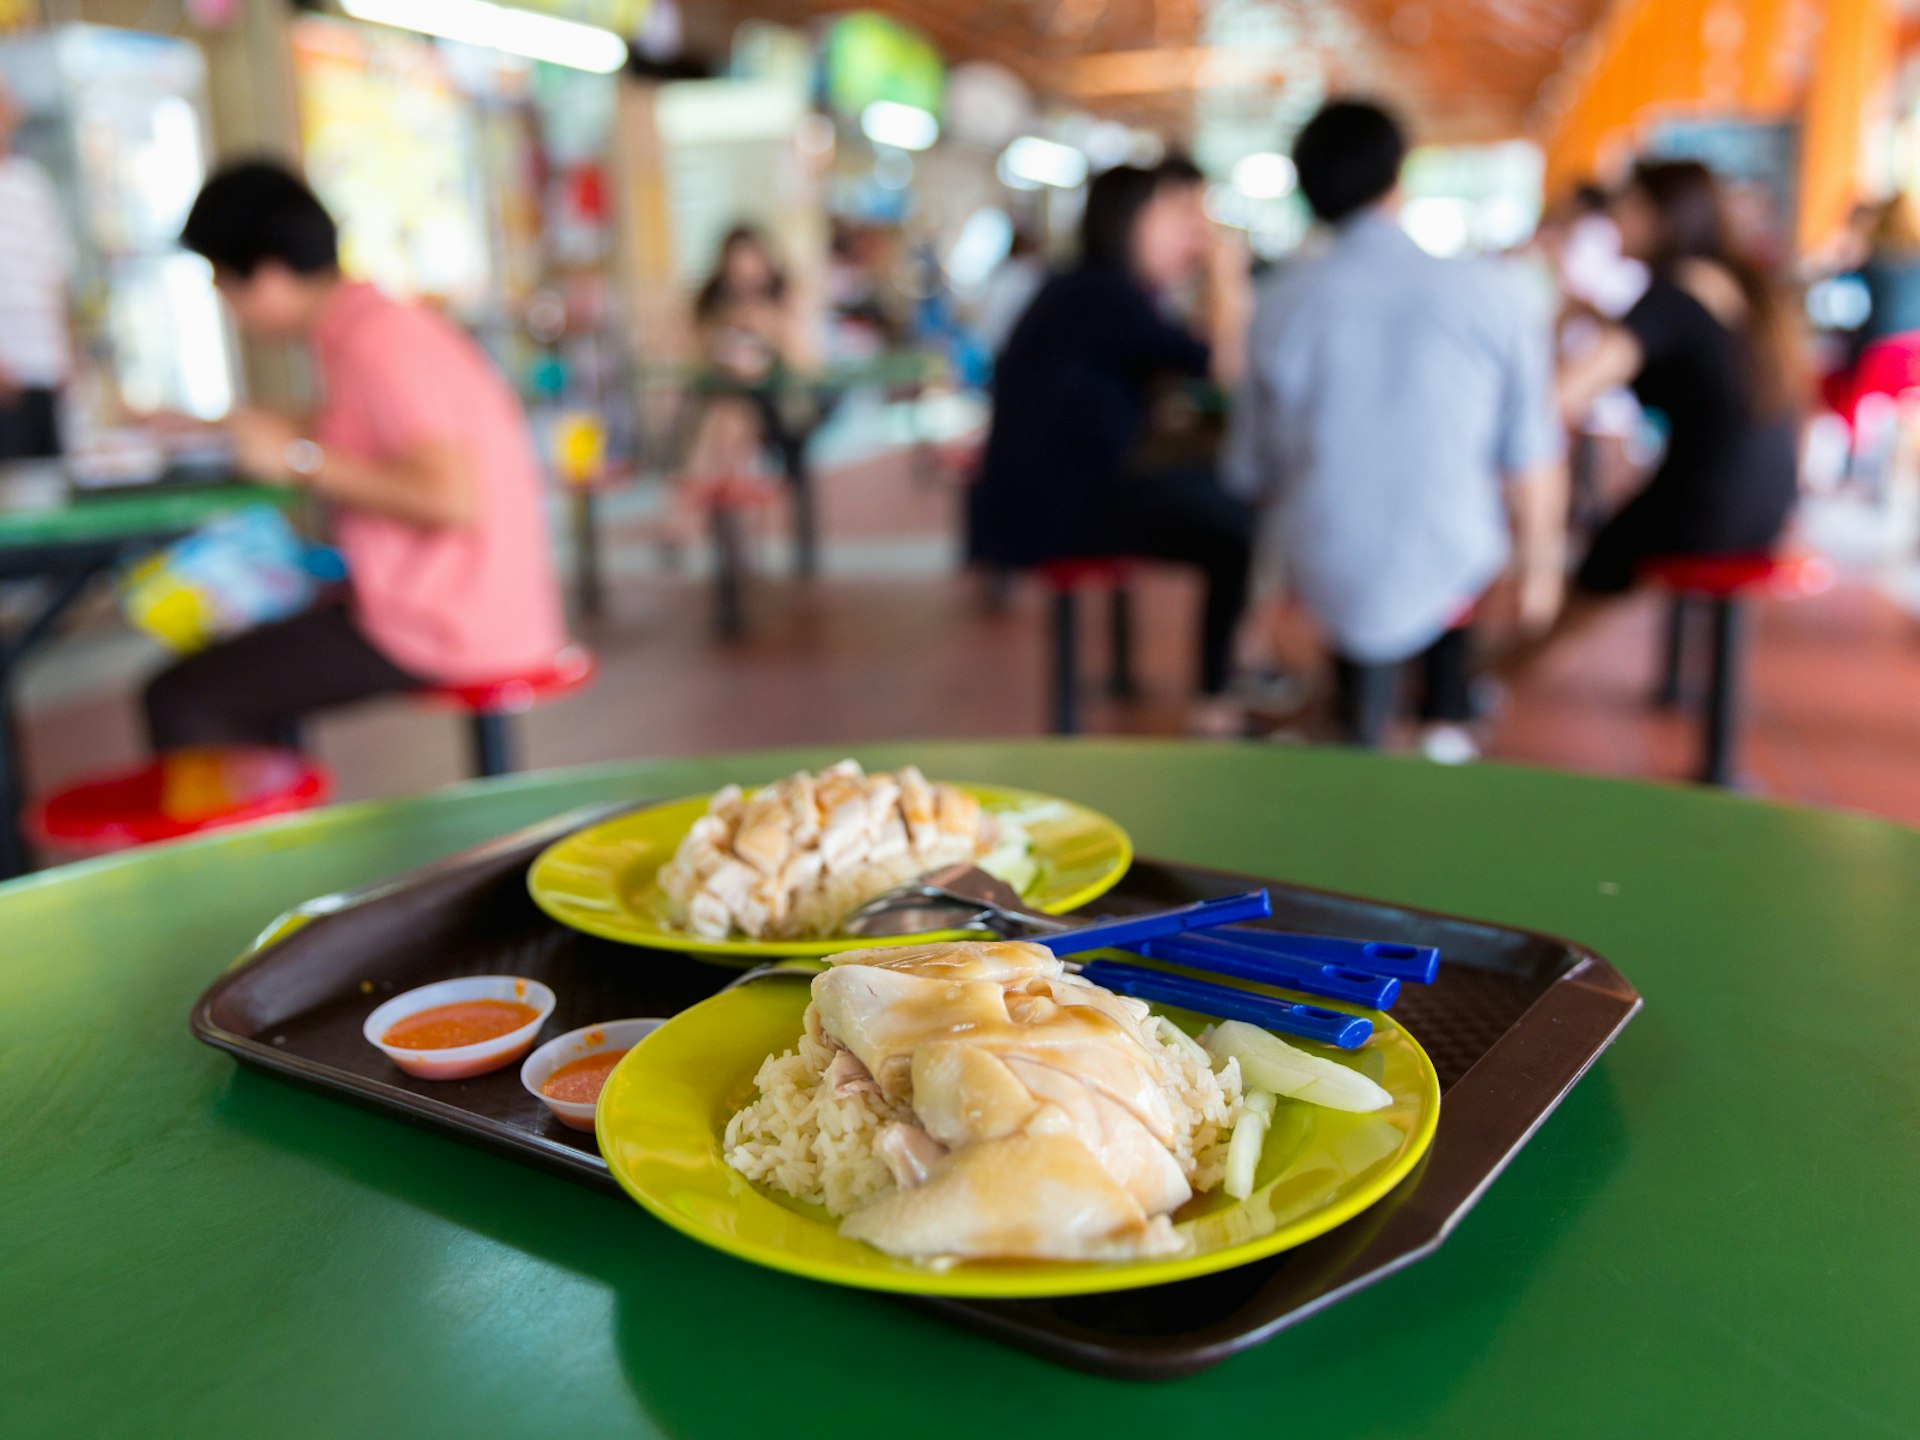 Tian Tian's Hainanese chicken and rice © 2p2play / Shutterstock